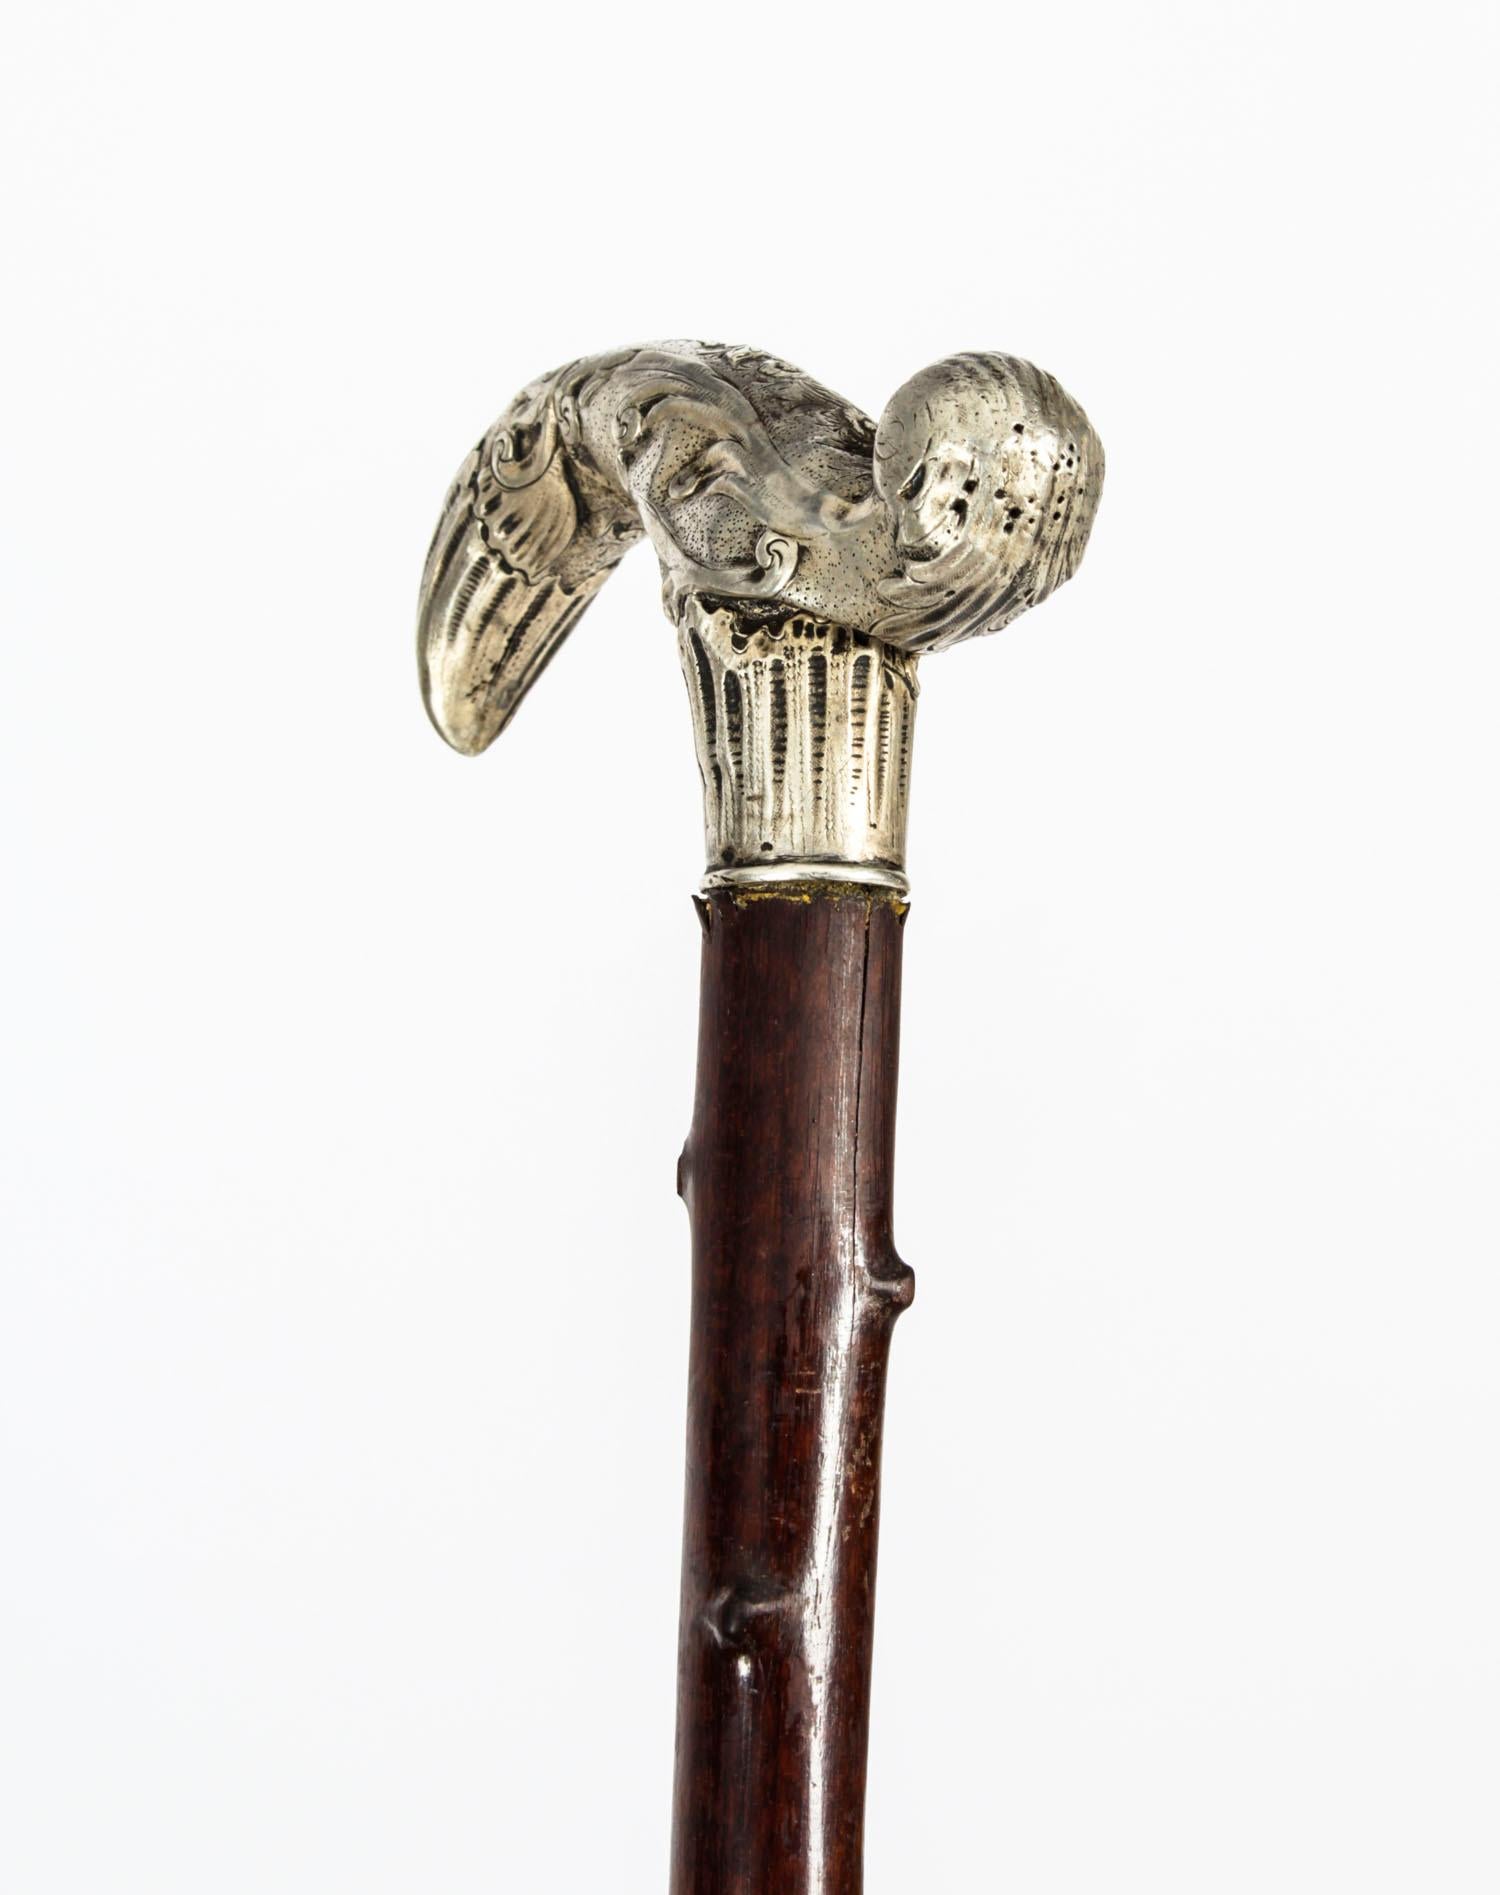 Antique Silver Plated Walking Cane Stick, 19th Century 1